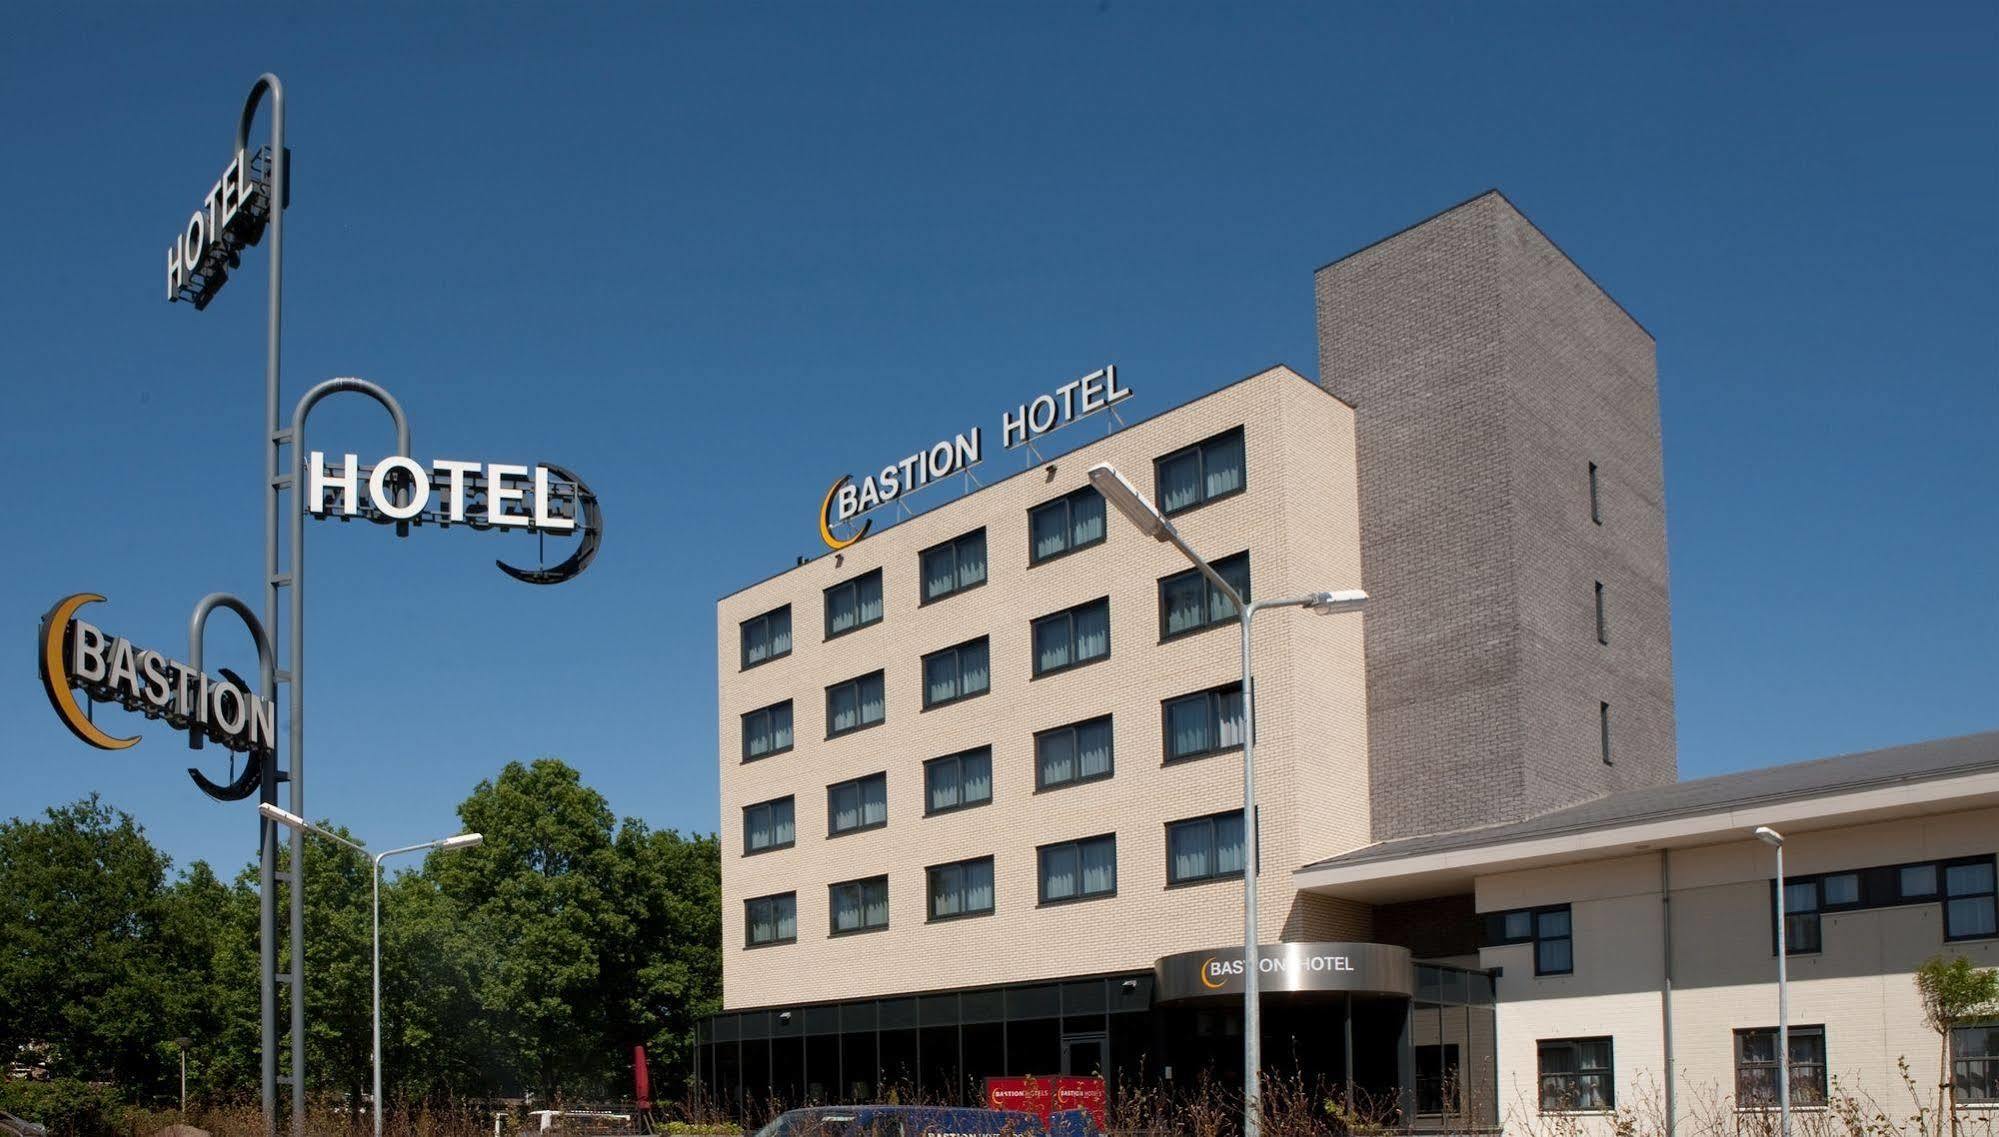 Bastion Hotel Roosendaal Exterior foto